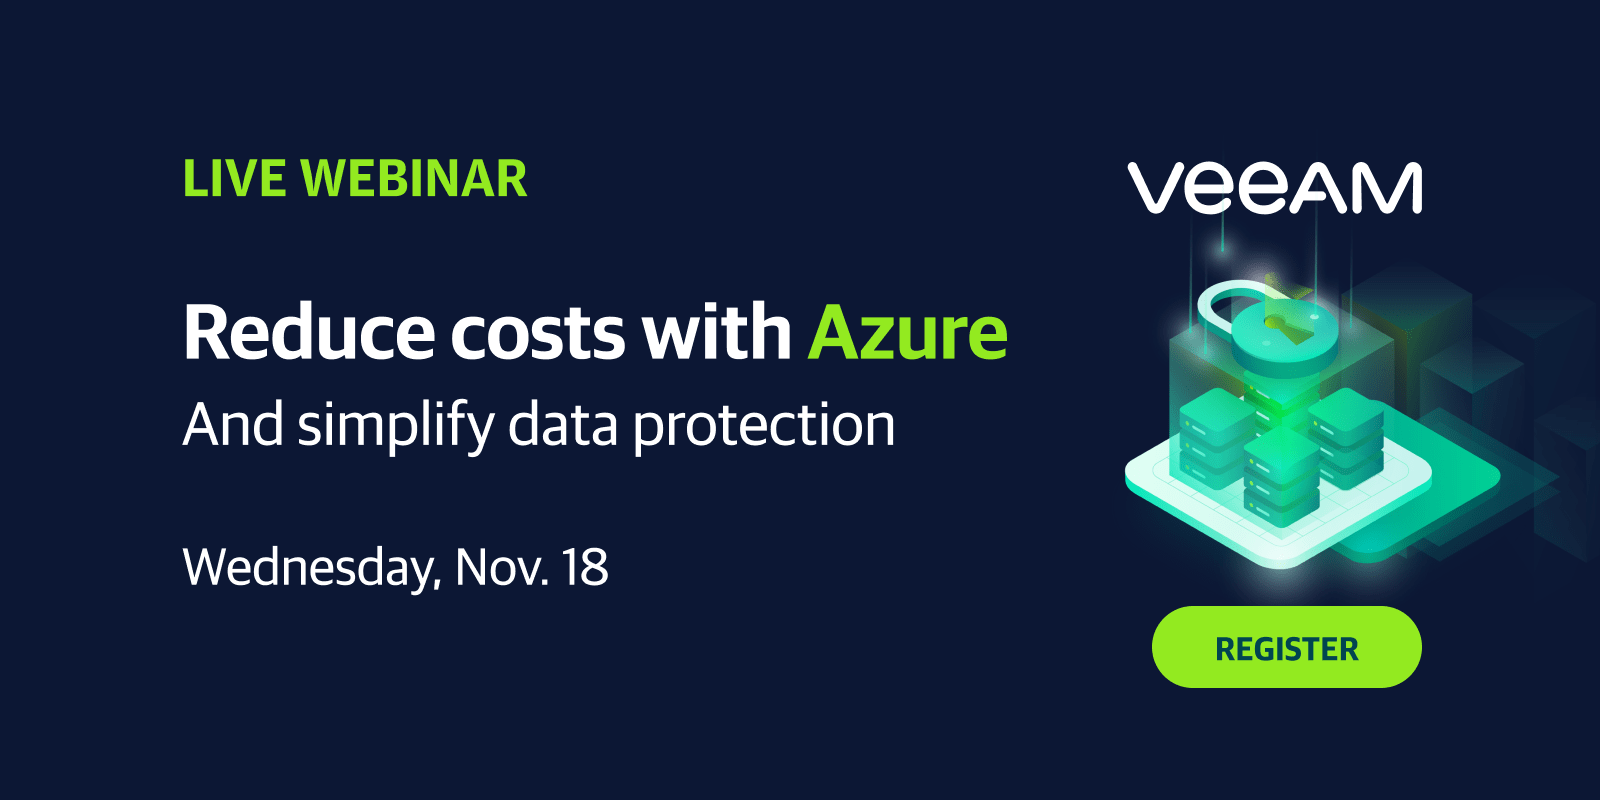 Reduce costs and simplify data protection with Azure